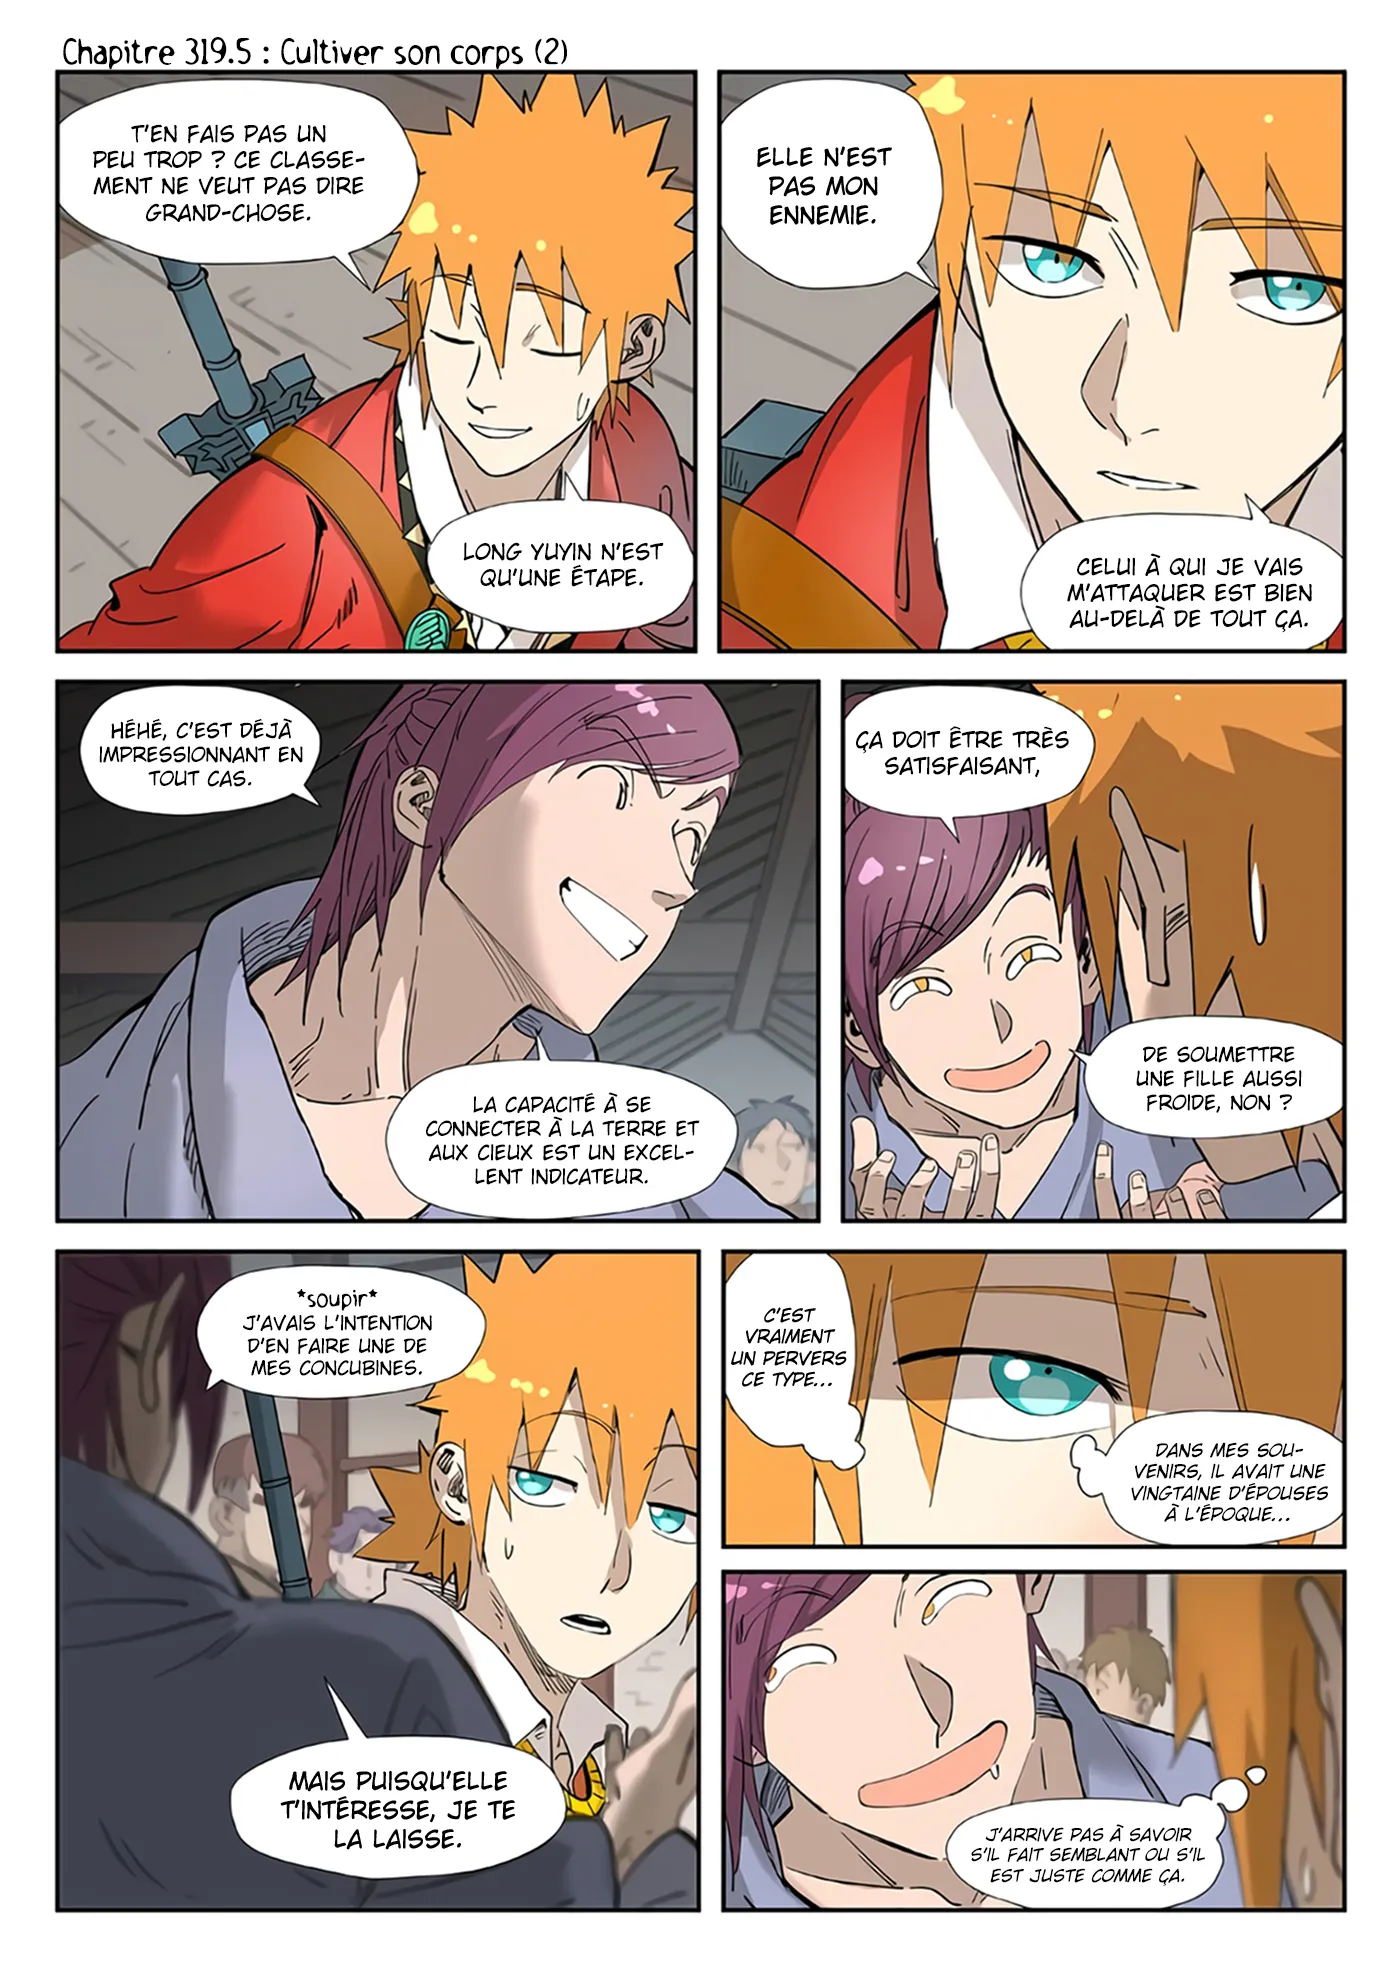 Tales Of Demons And Gods: Chapter chapitre-319.5 - Page 1